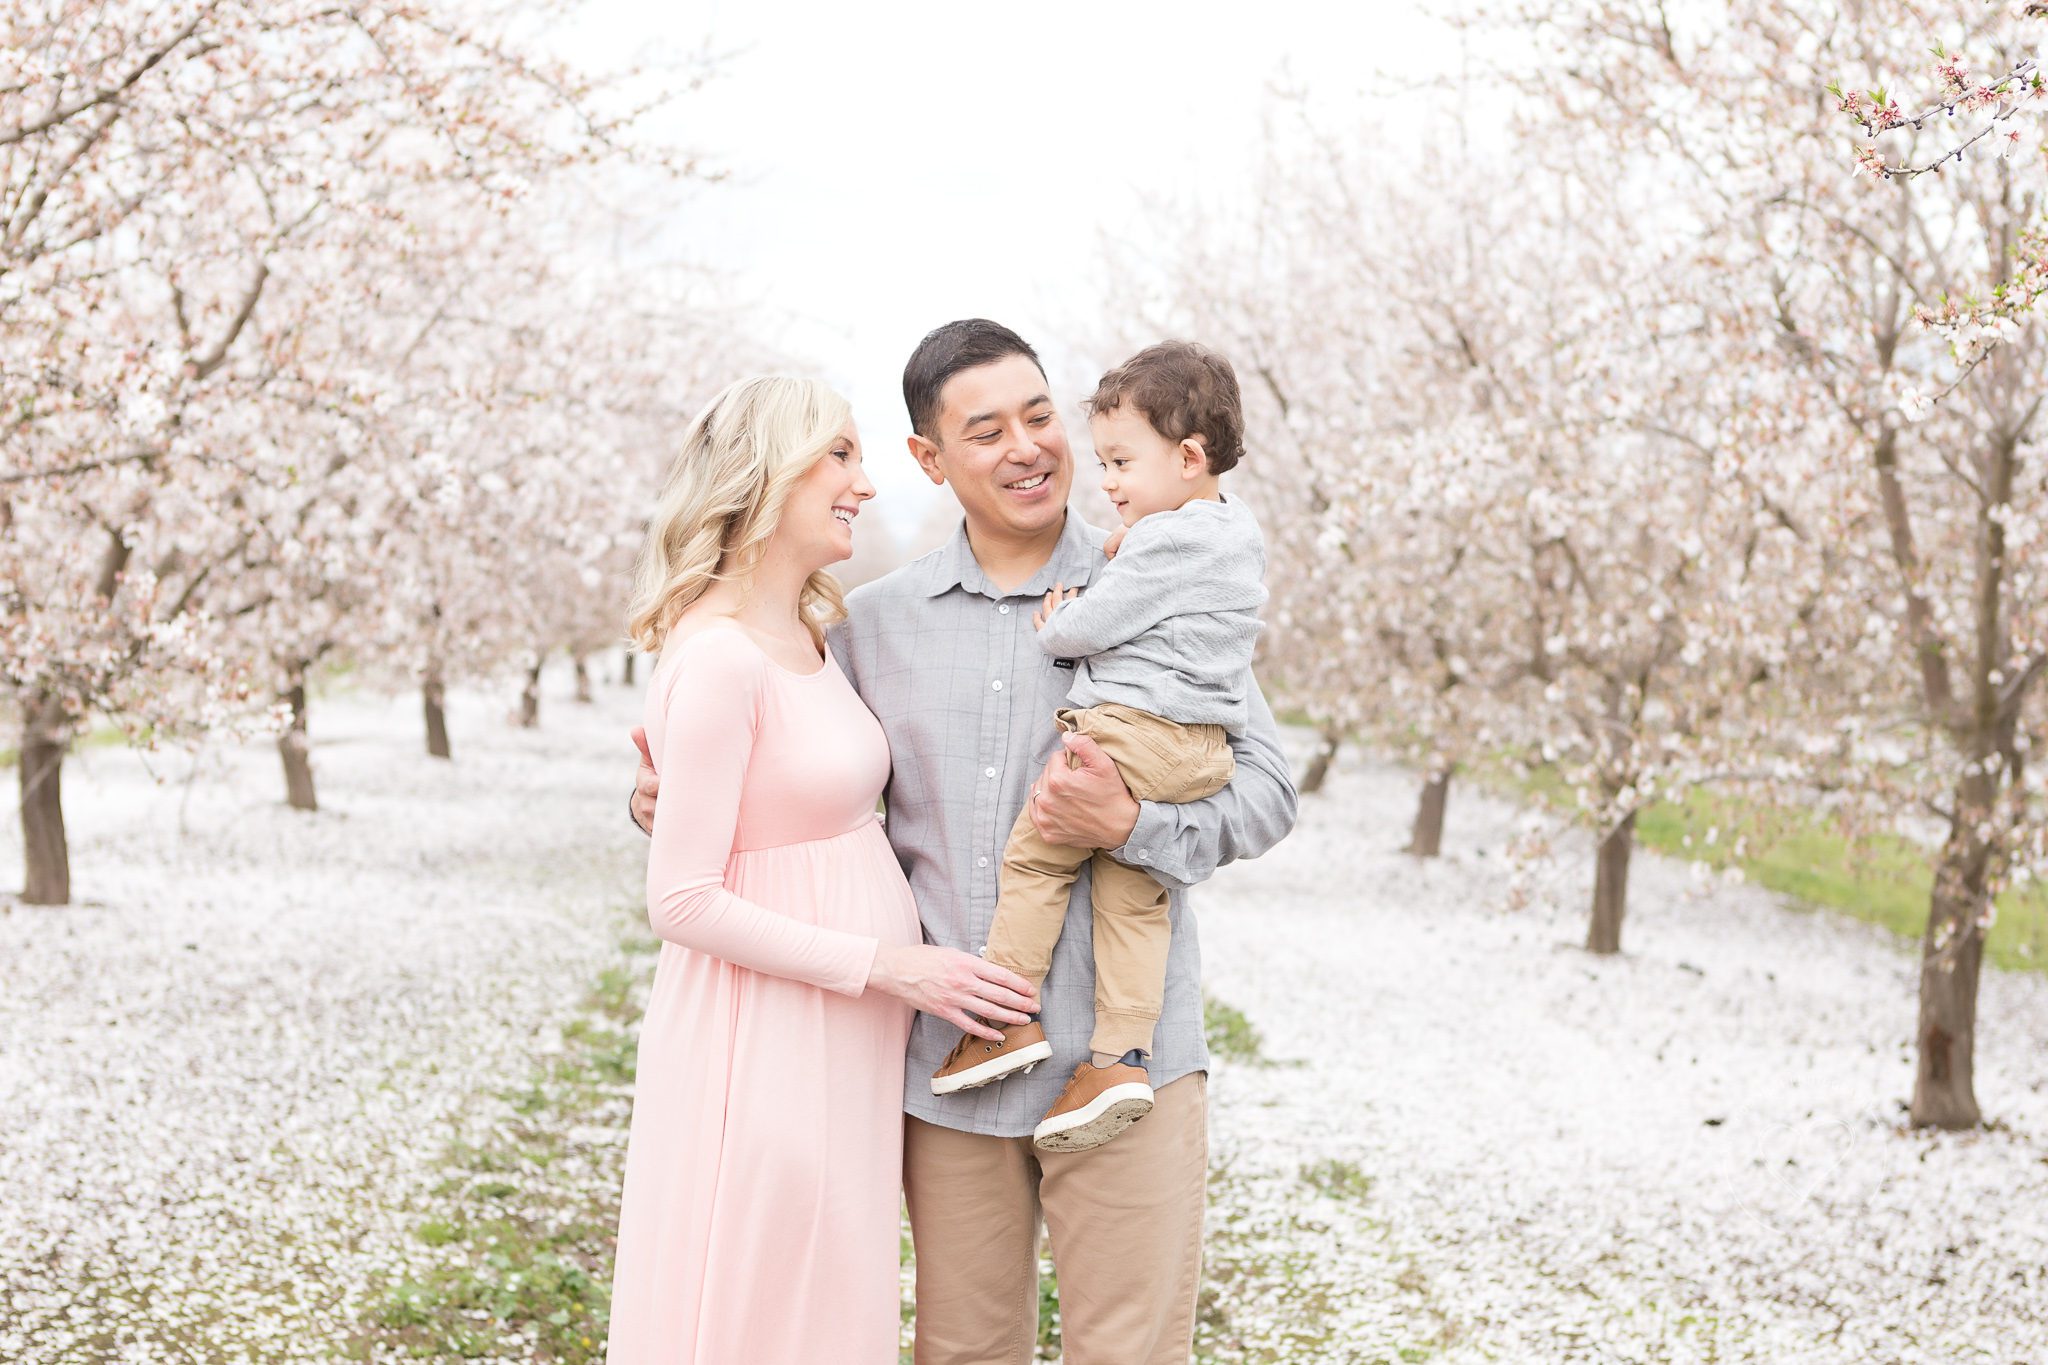 Family maternity session, pink maternity dress, dad holding little boy, blossoms,